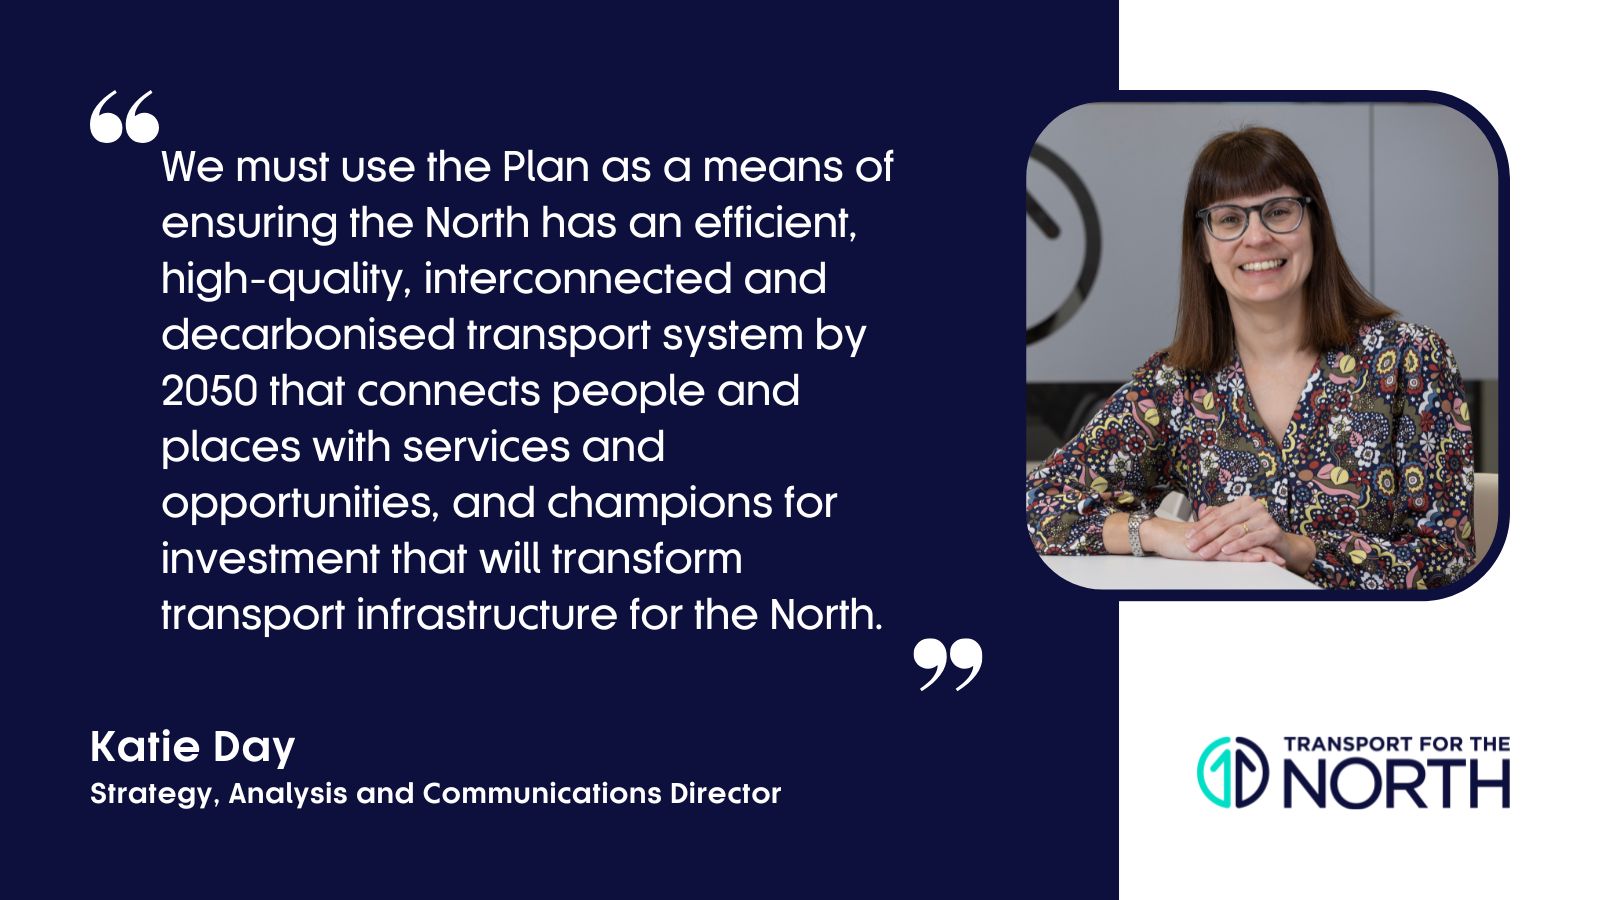 Katie Day comments on the closing of the Strategic Transport Plan consultation